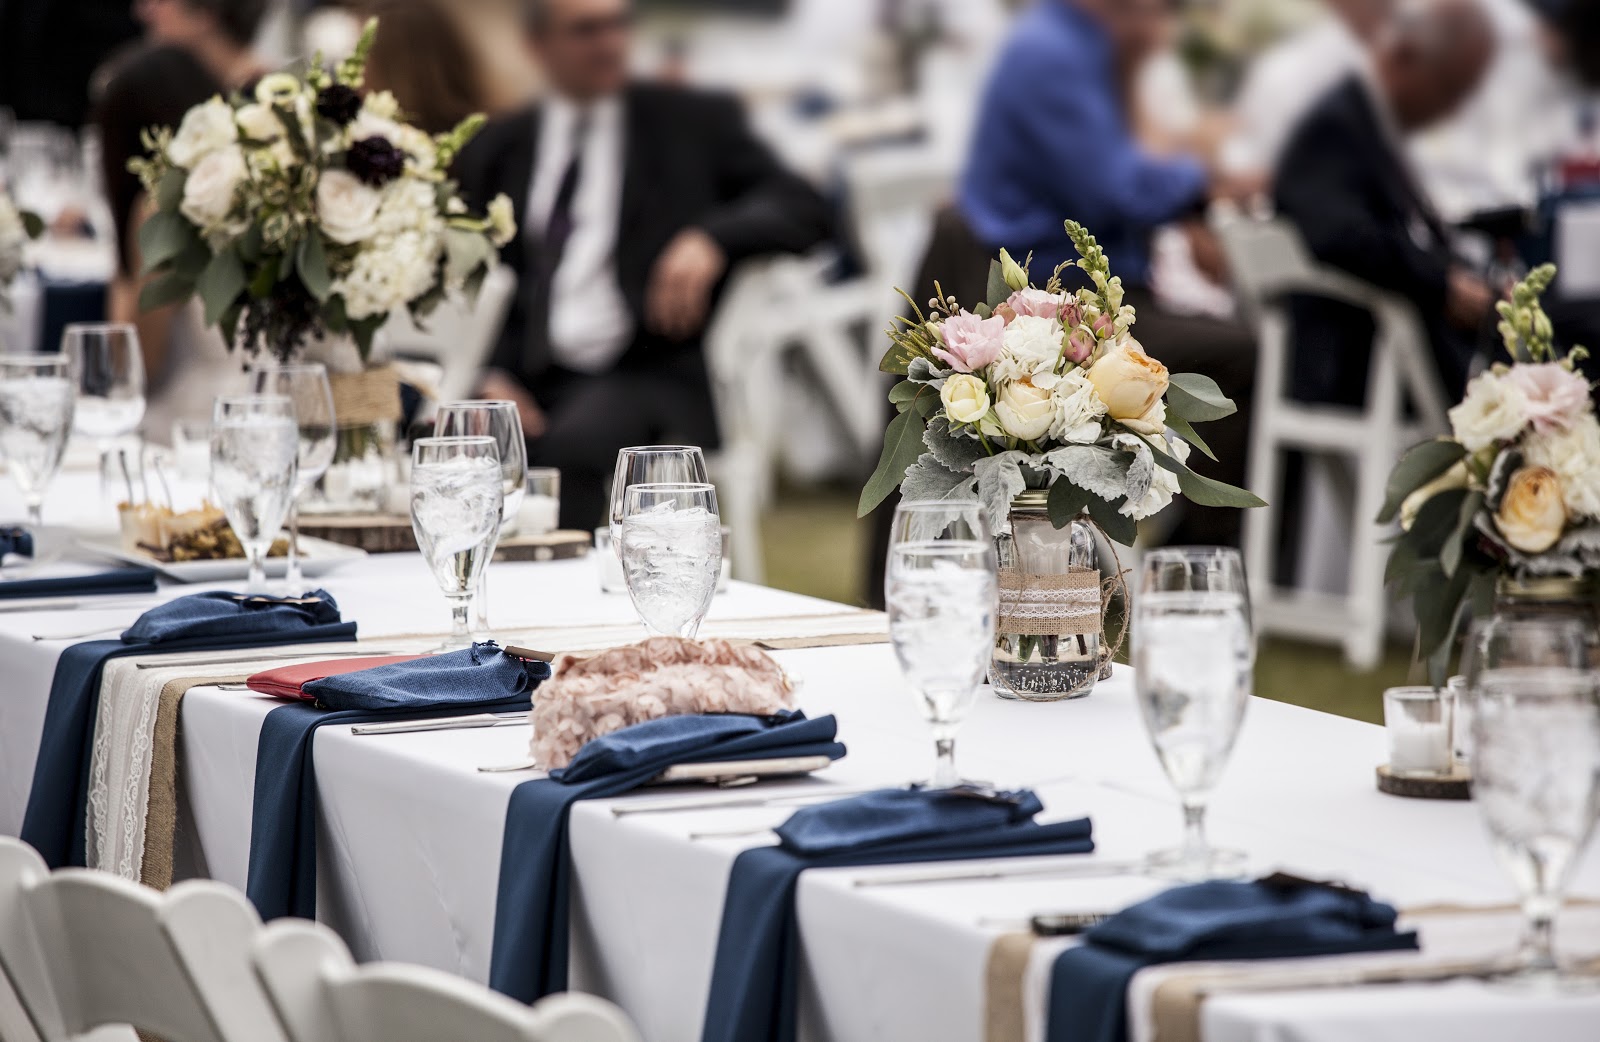 5 Steps To Create A Wedding Seating Chart, How To Arrange Tables For A Wedding Reception